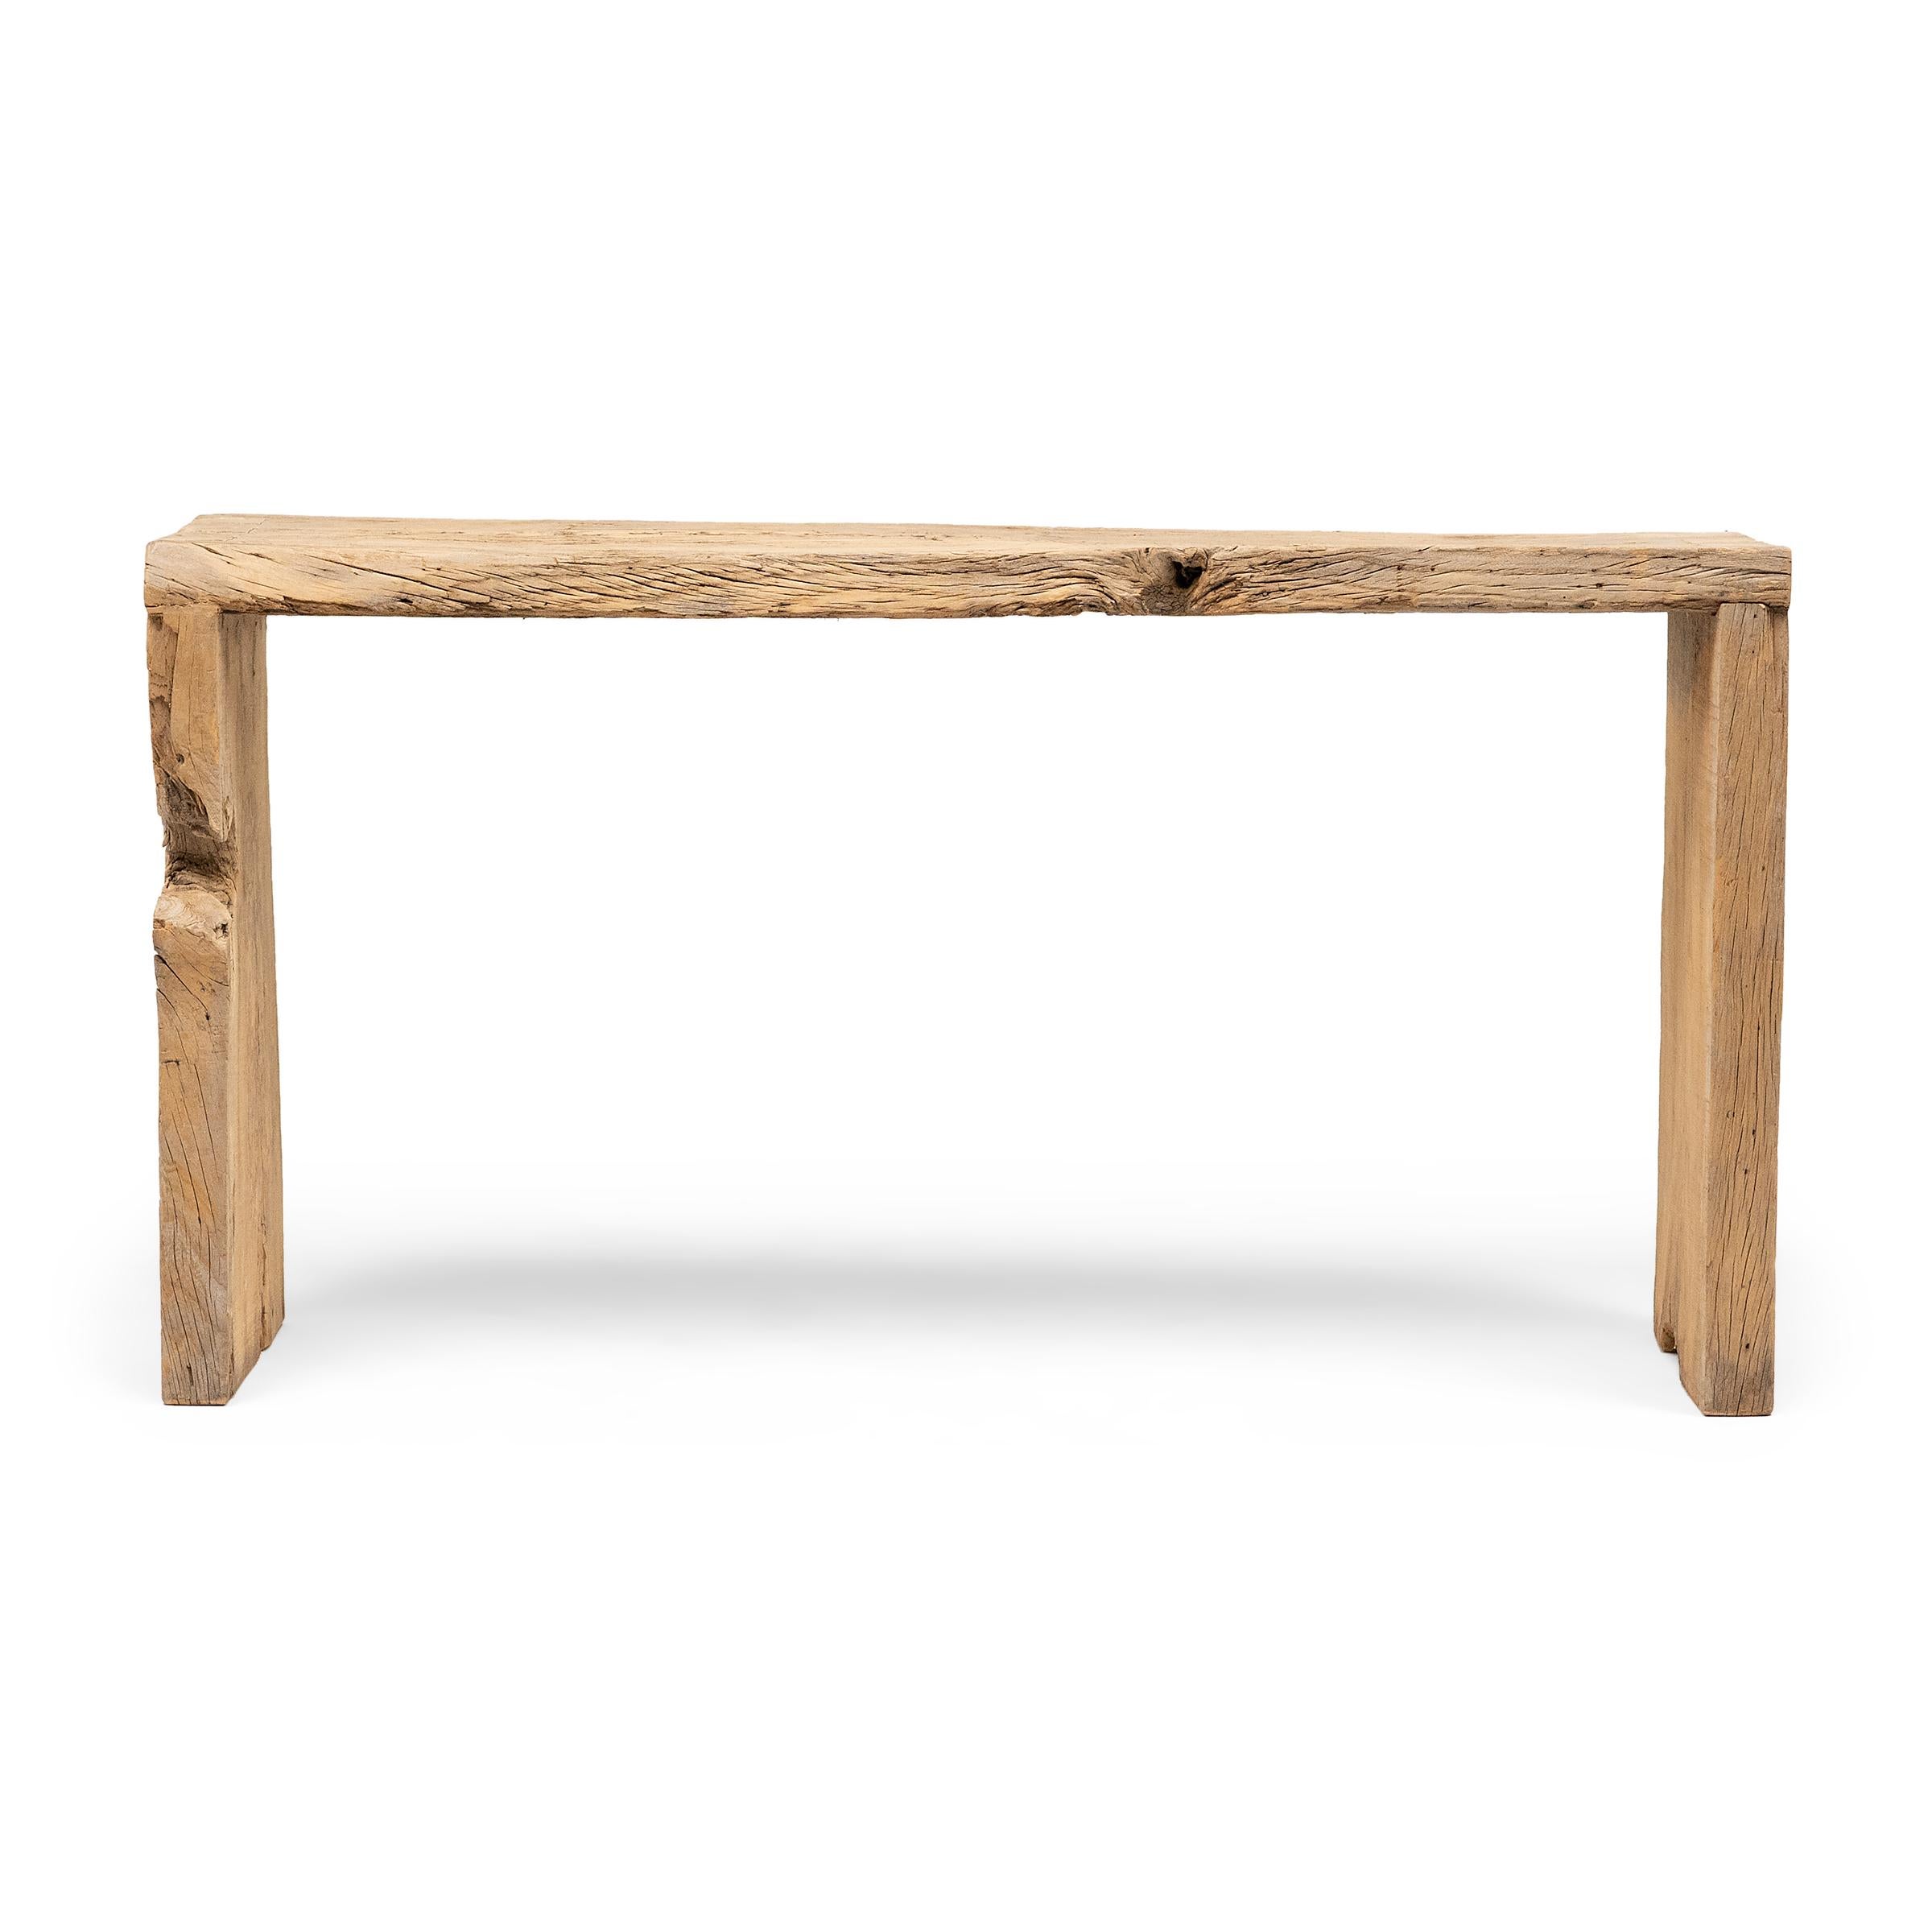 Chinese Reclaimed Elm Waterfall Table For Sale